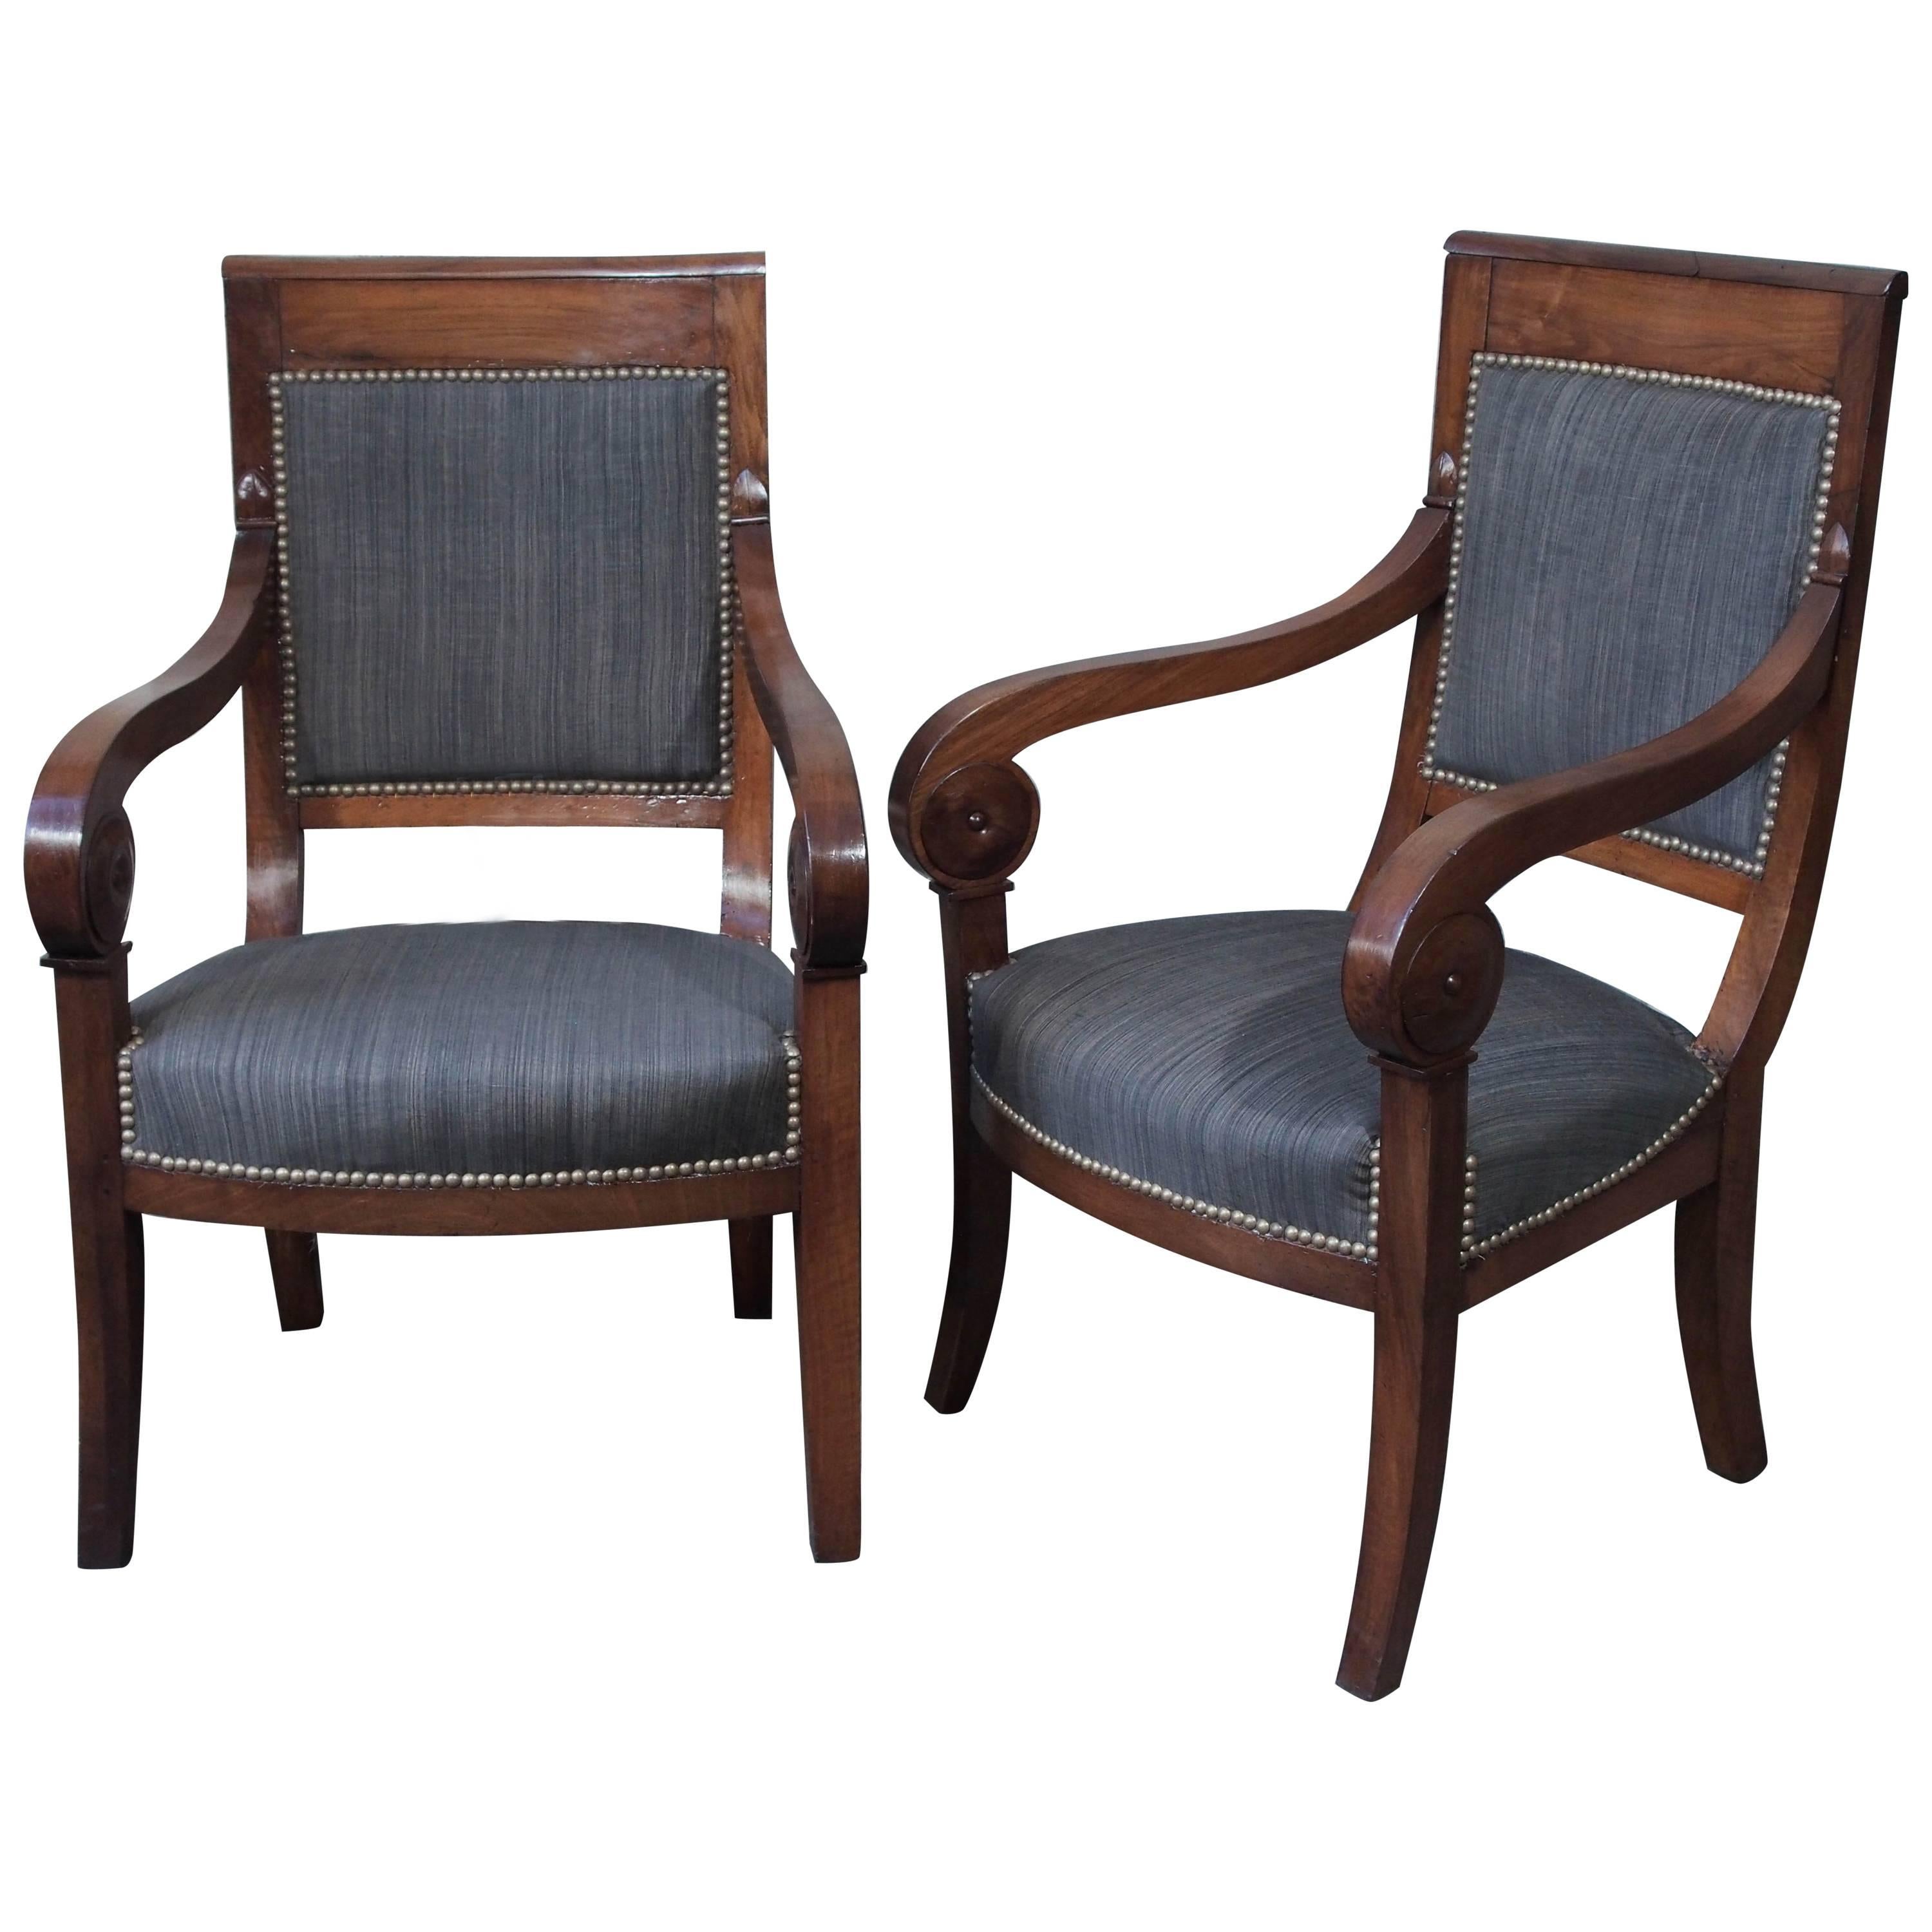 Pair of French Restauration Period Walnut Fauteuils with Scroll Arms